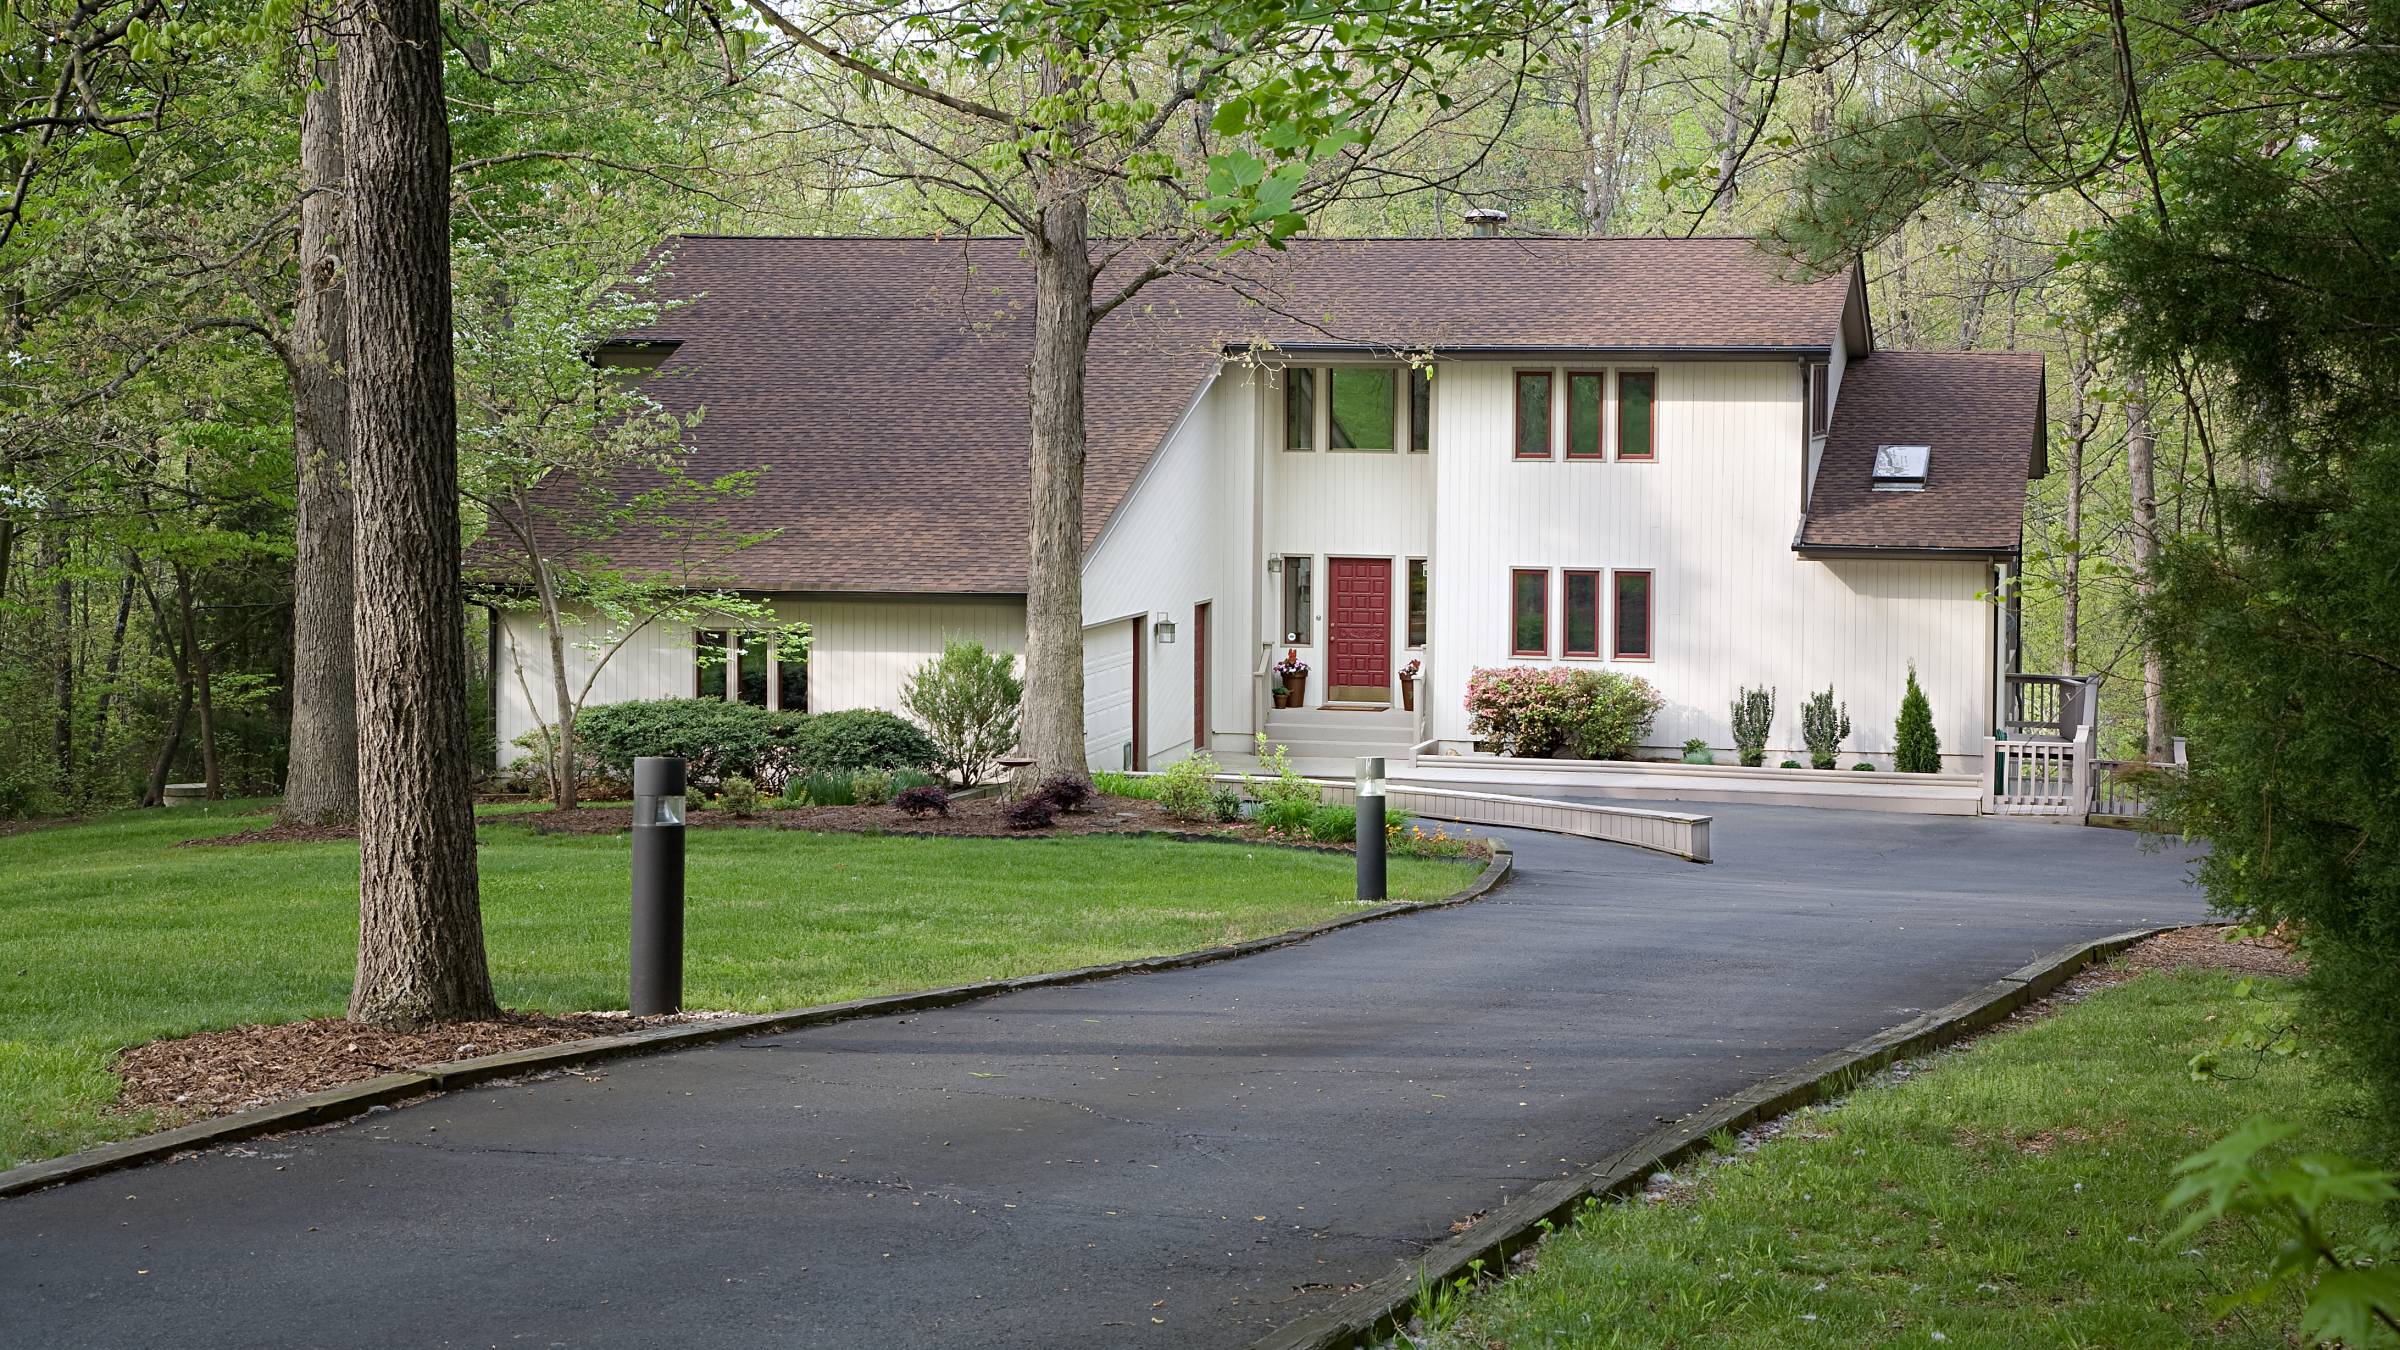 a private residence with a tarmac driveway